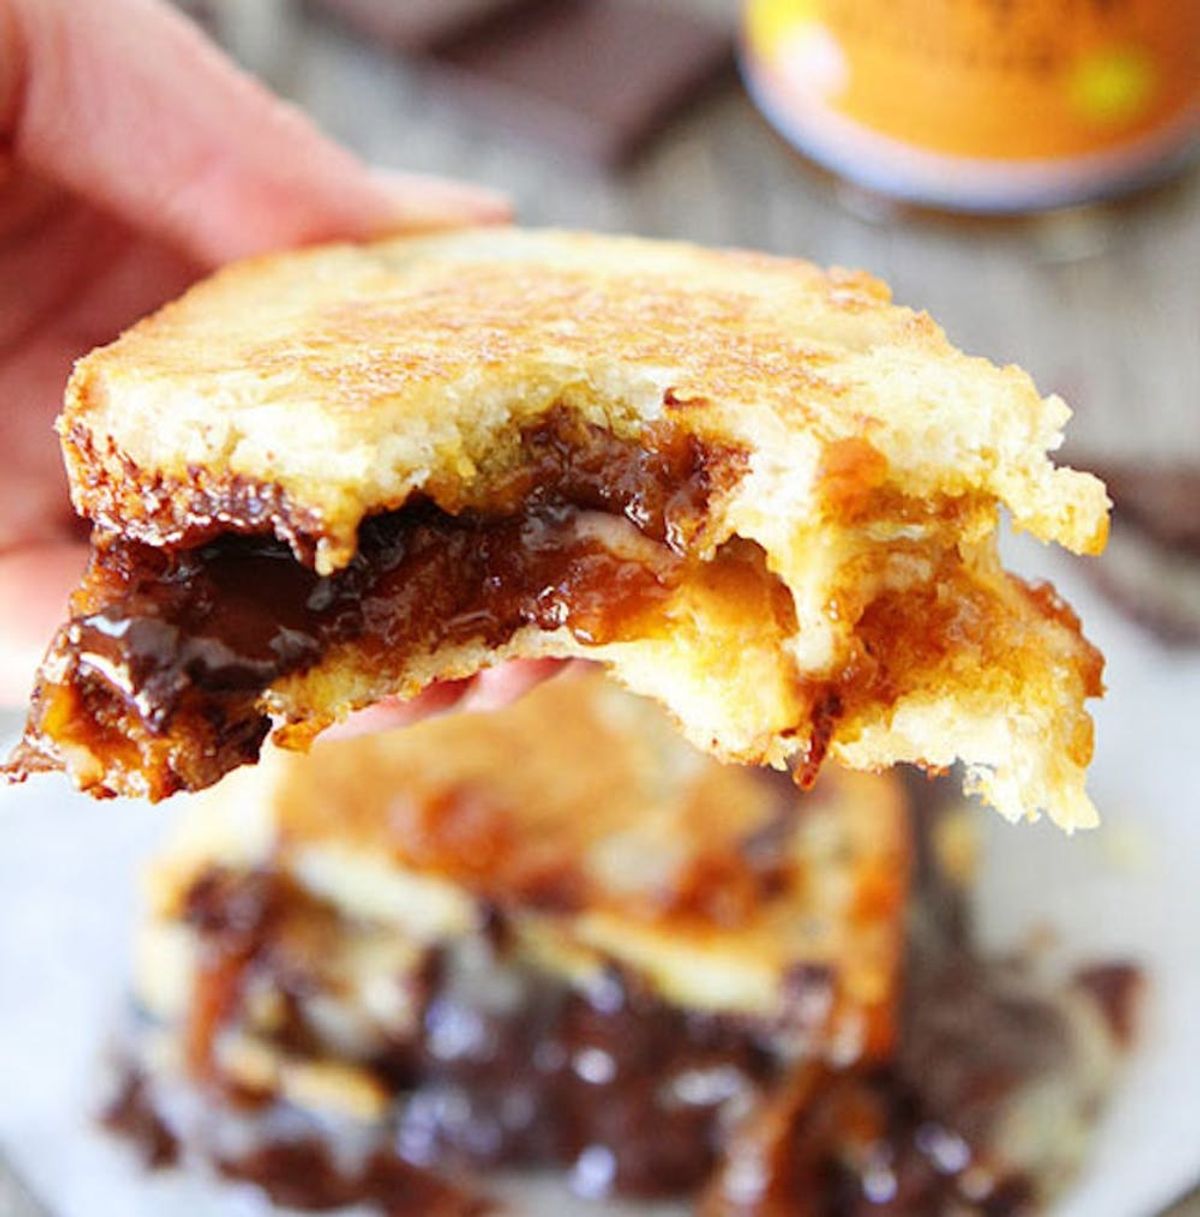 The Grown-Up Grilled Cheese: 20 Ways to Grow Old With The One You Love